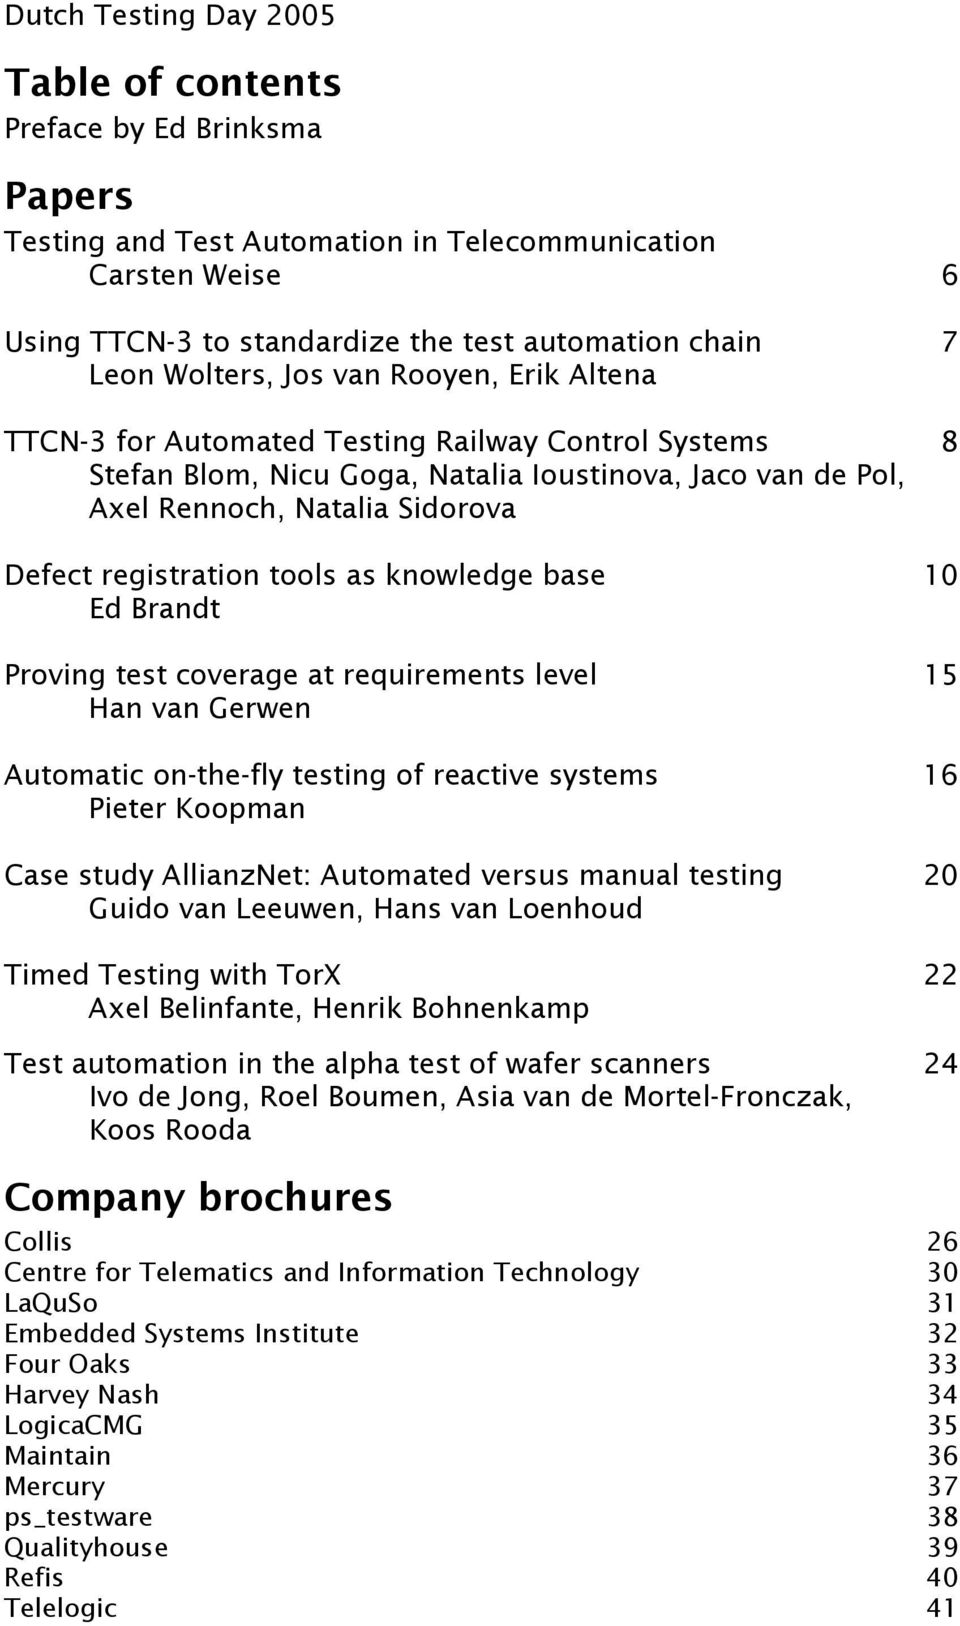 registration tools as knowledge base 10 Ed Brandt Proving test coverage at requirements level 15 Han van Gerwen Automatic on-the-fly testing of reactive systems 16 Pieter Koopman Case study